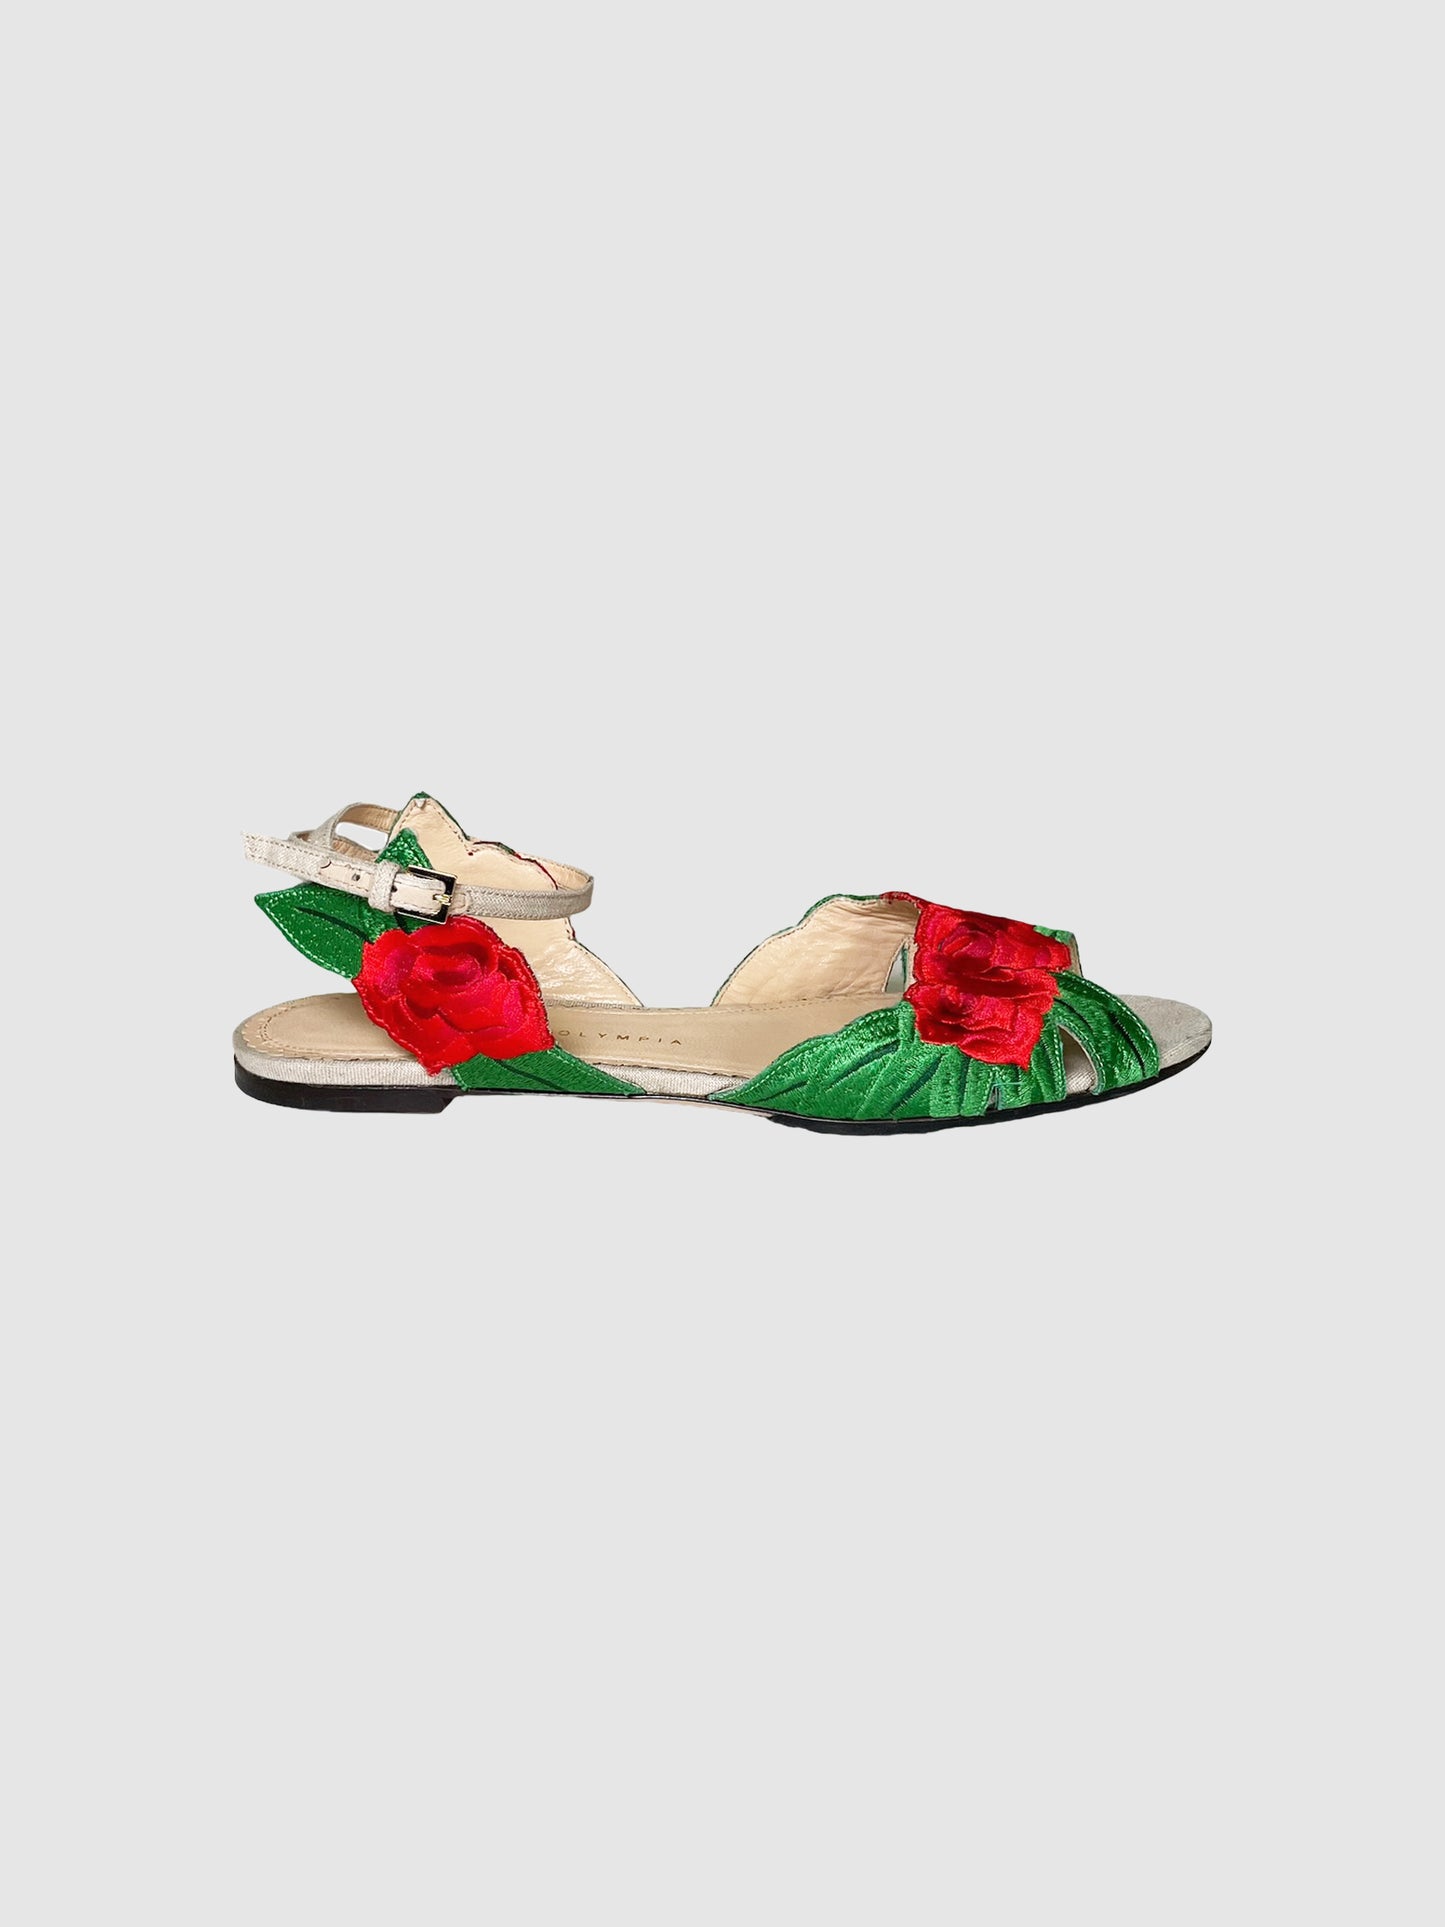 Floral Embroidered Sandals - Size 38.5